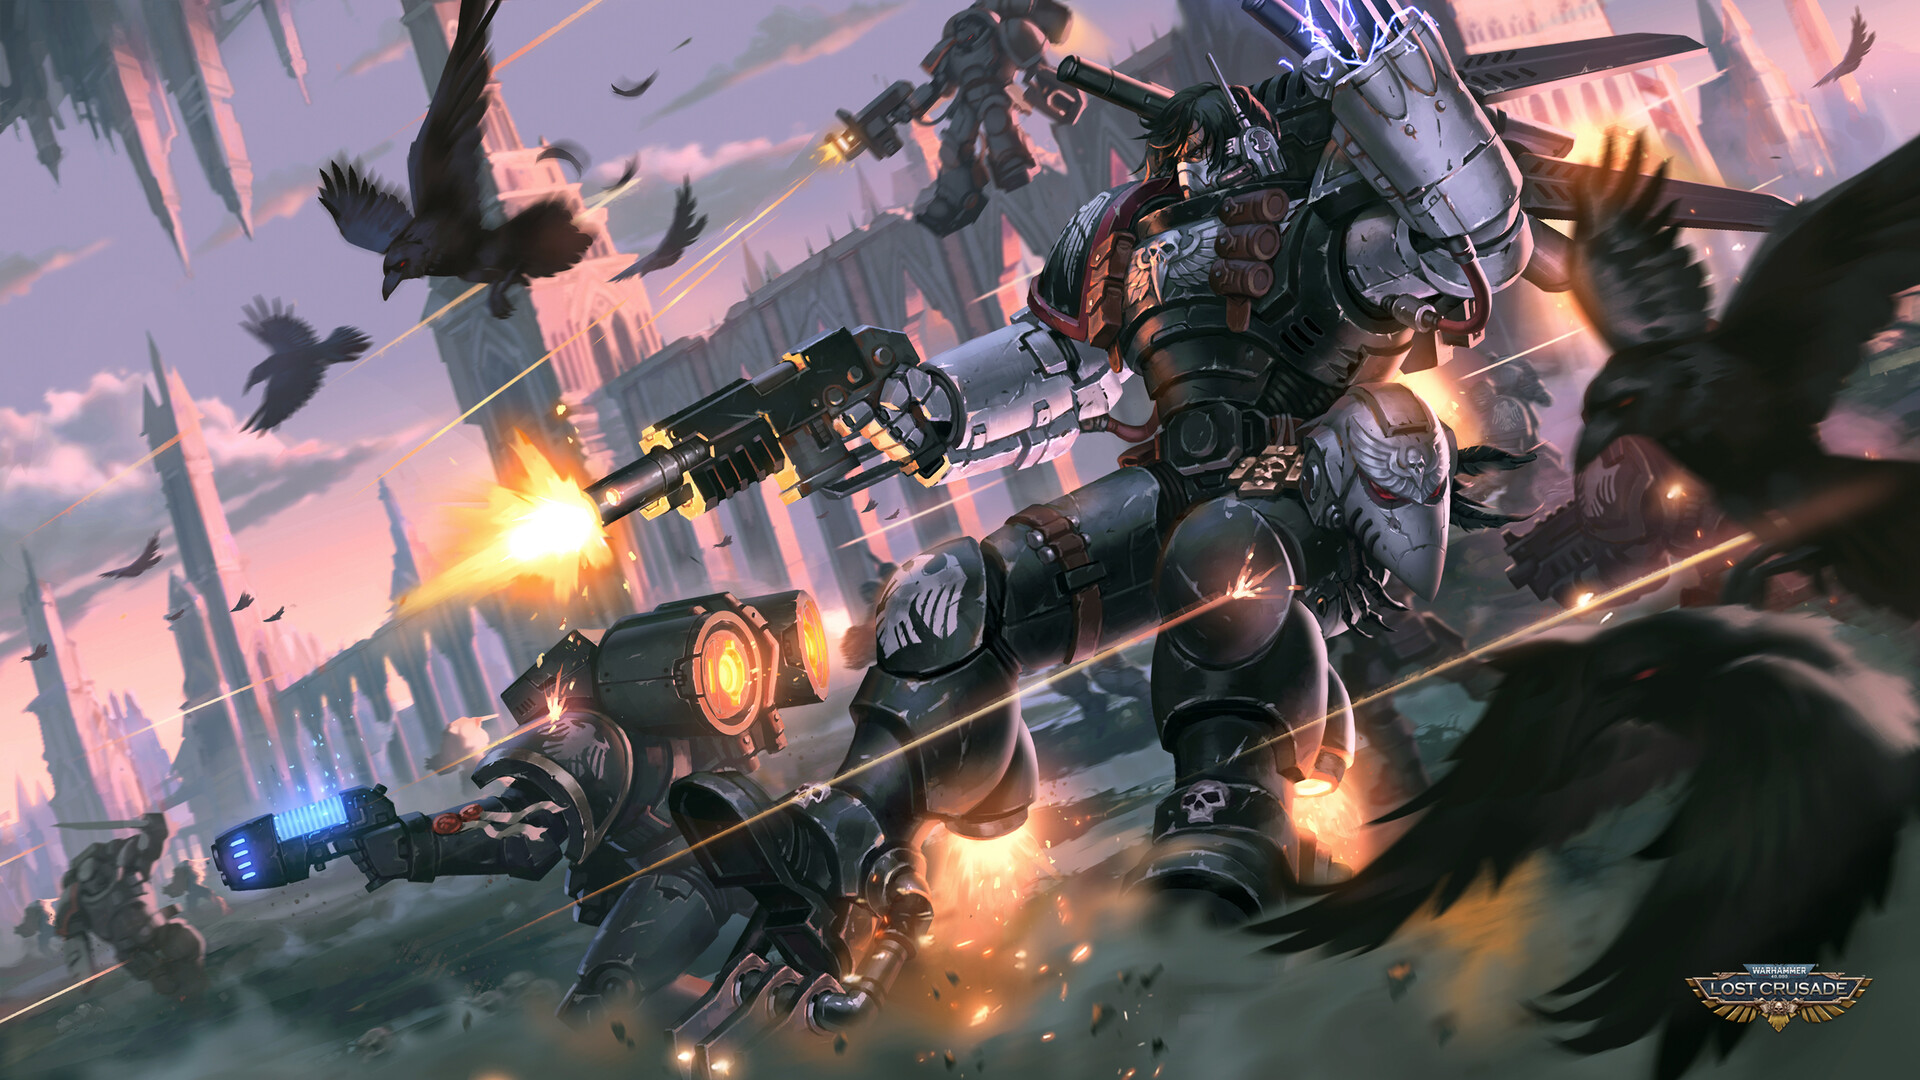 General 1920x1080 Warhammer 40,000 Warhammer science fiction high tech Warhammer 30,000 painting gun bolter space marines power armor claws plasma jetpack Imperium of Man Kayvaan Shrike video games video game art video game characters Raven Guard